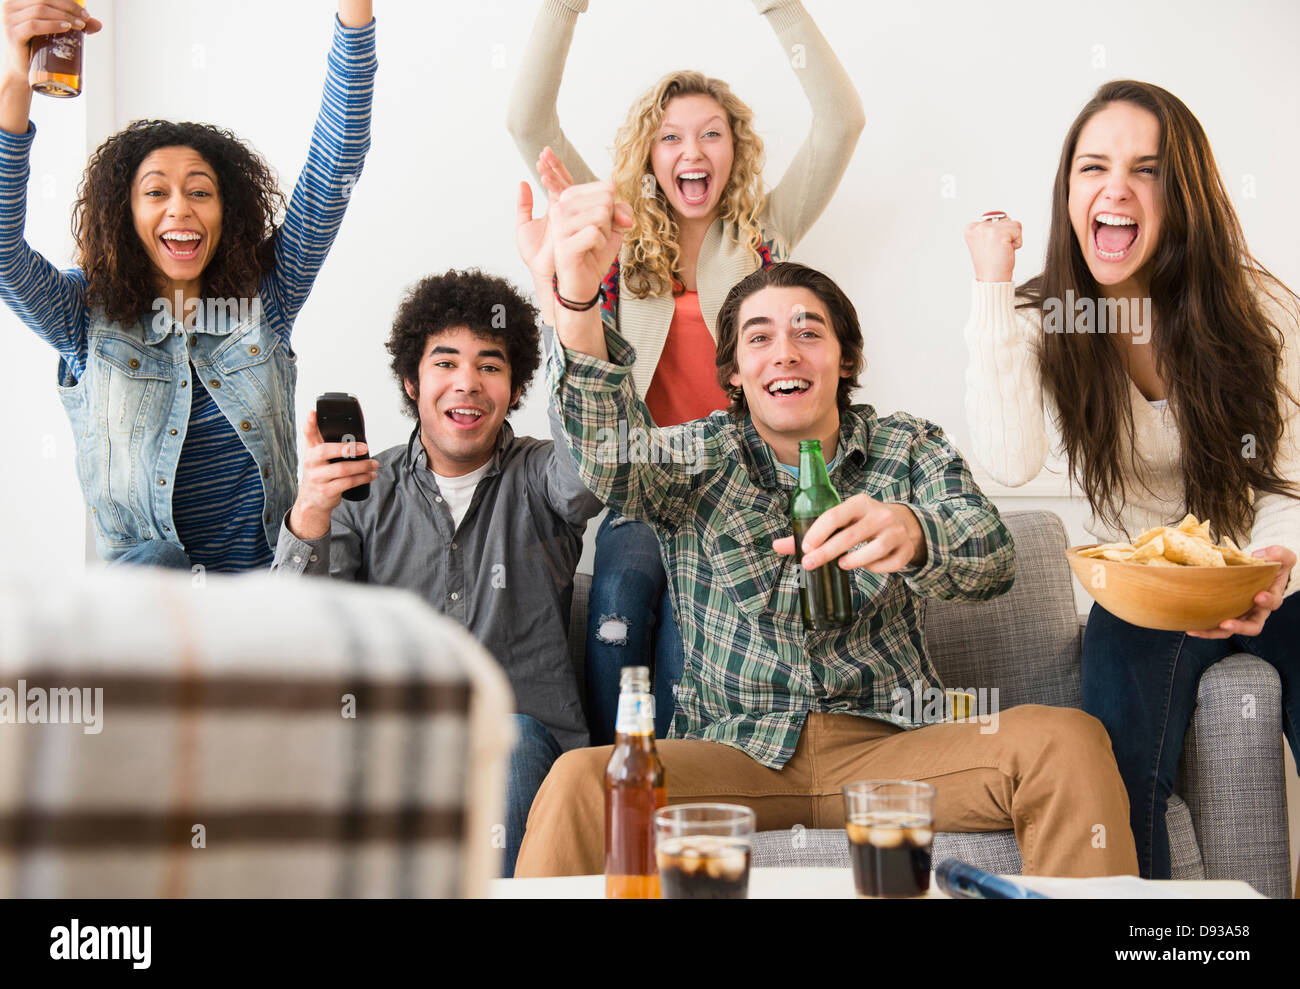 Friends cheering in living room Stock Photo